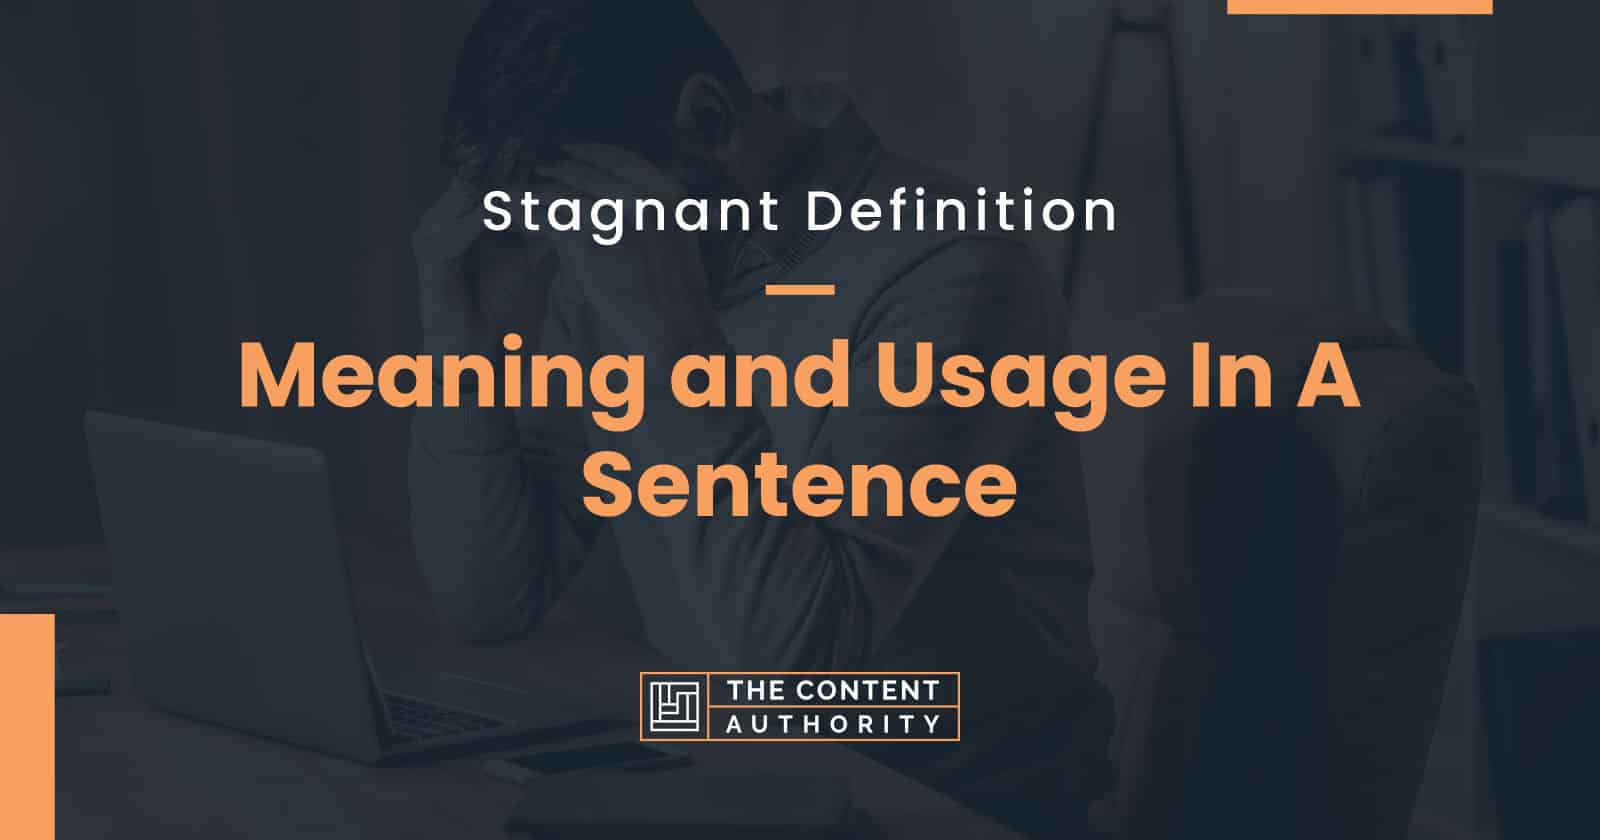 stagnant definition